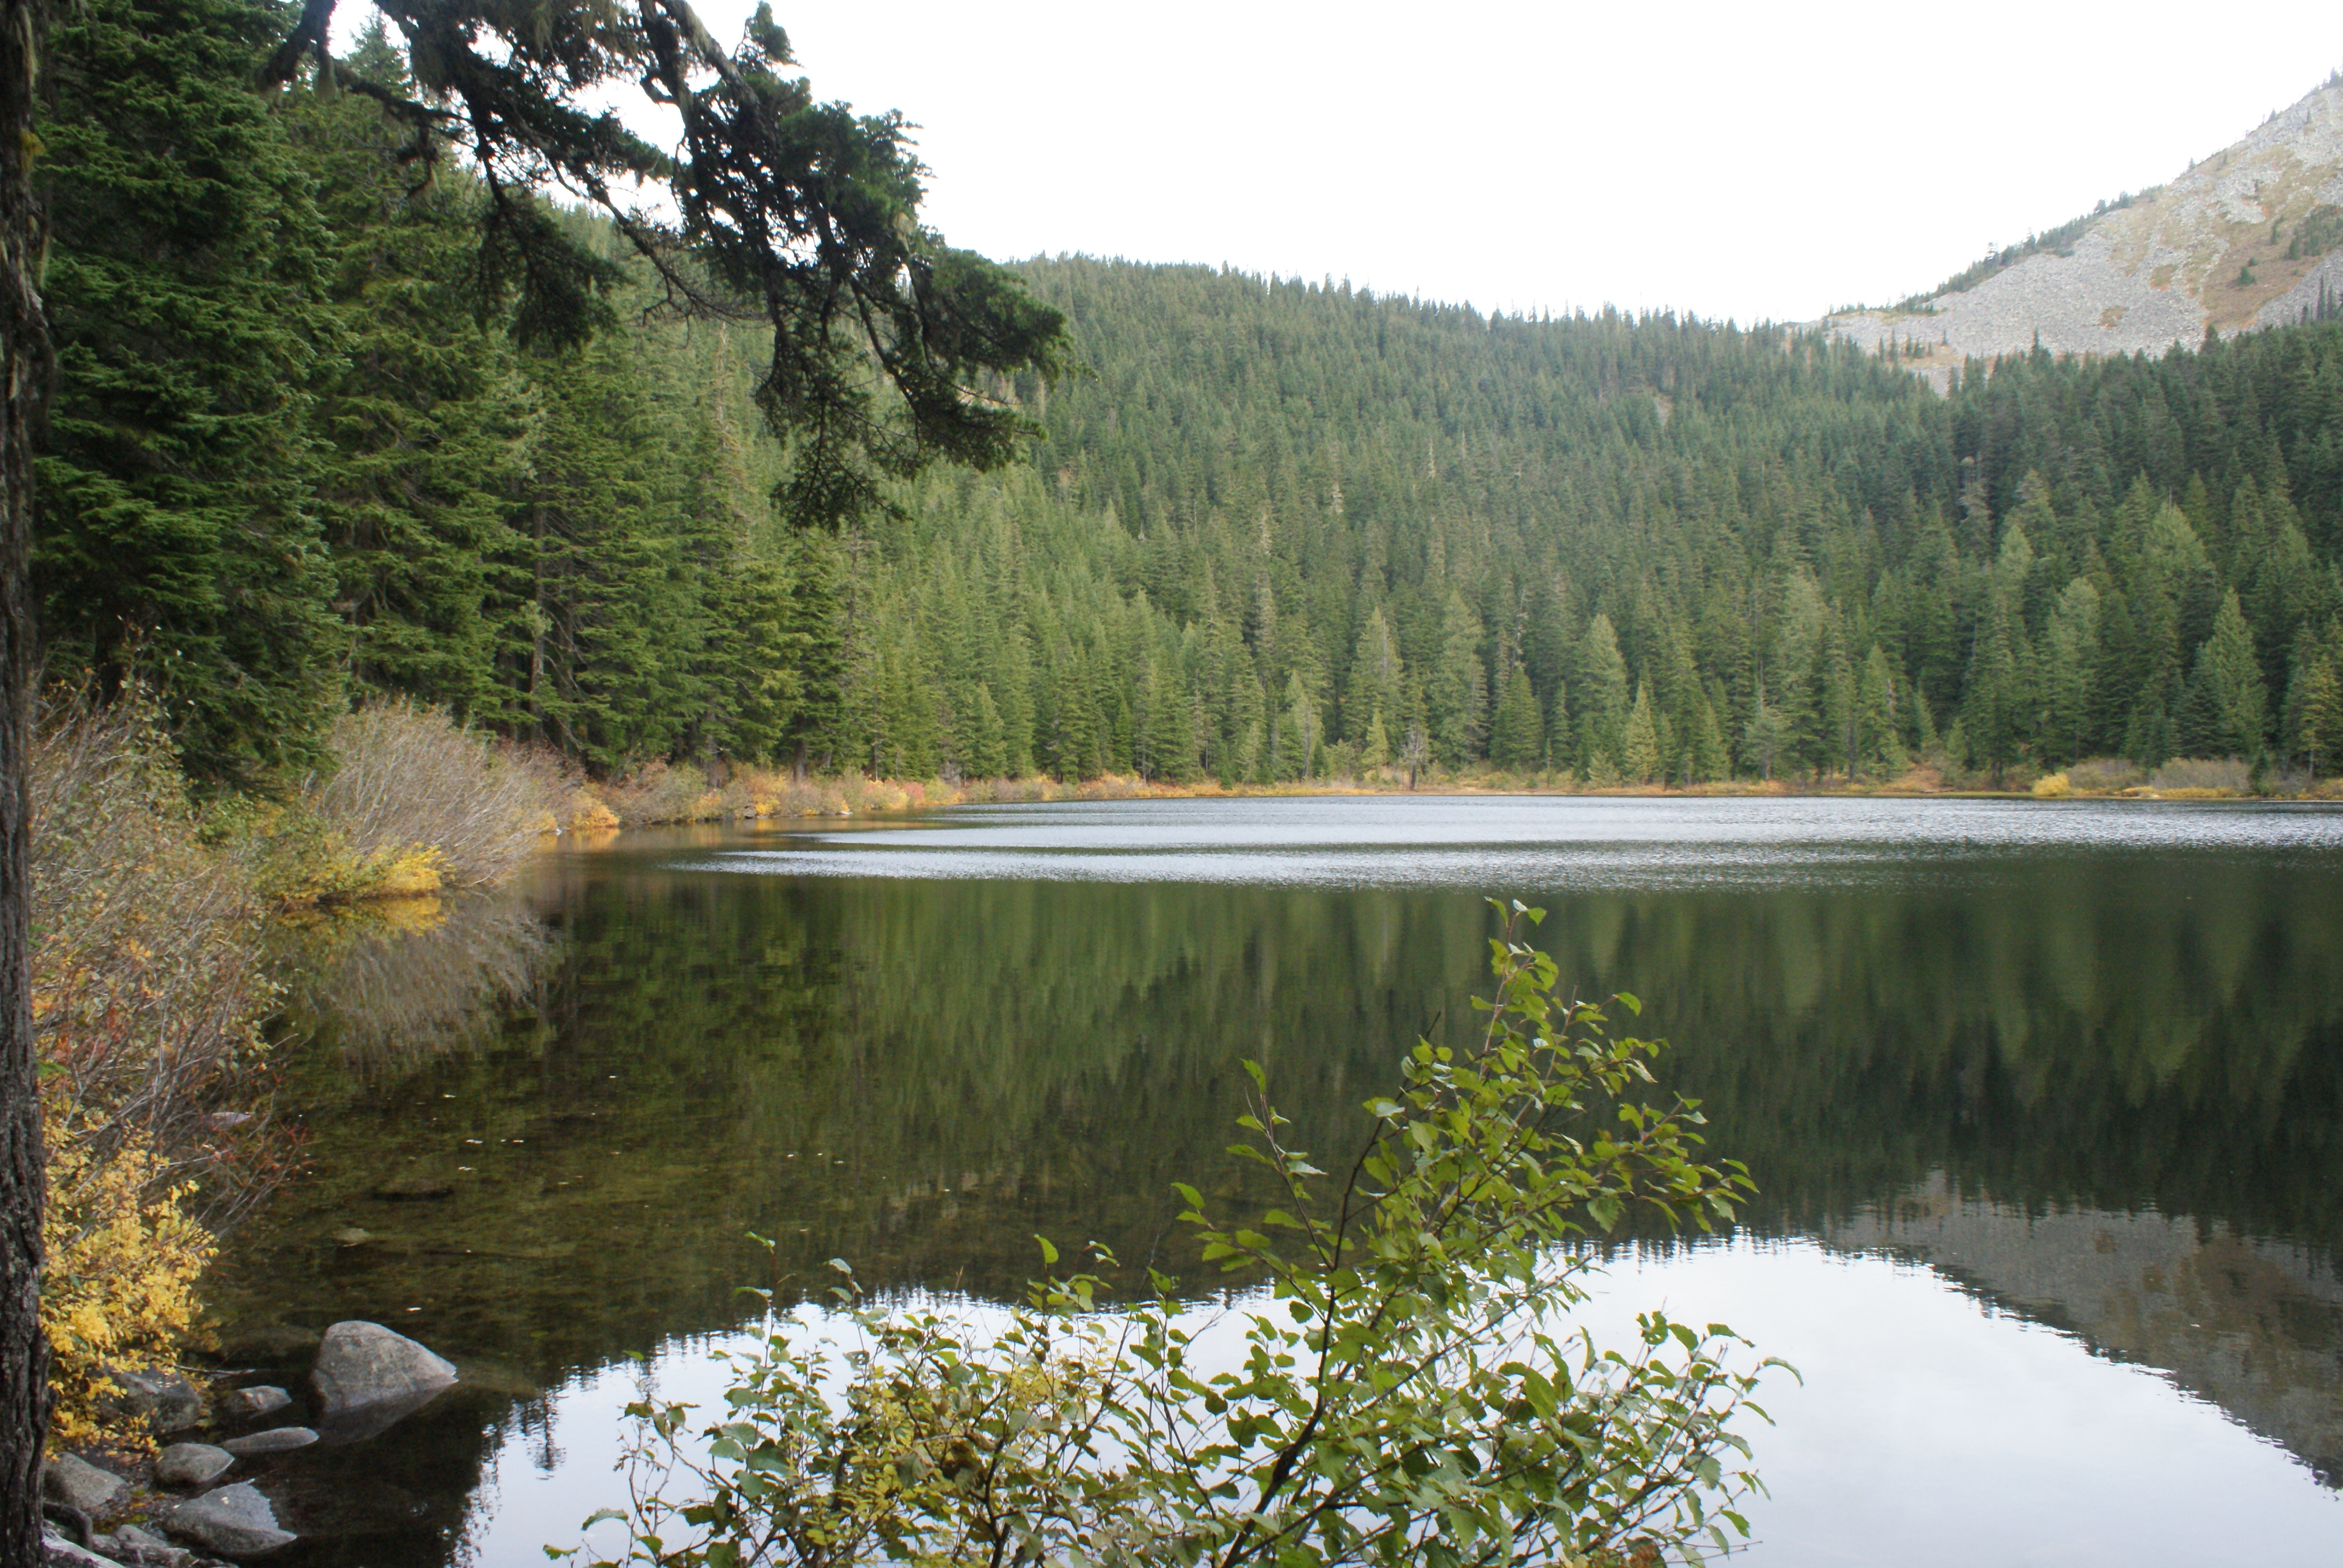 hiking with kids, children in nature, lake hikes I-90, alpine lakes wilderness